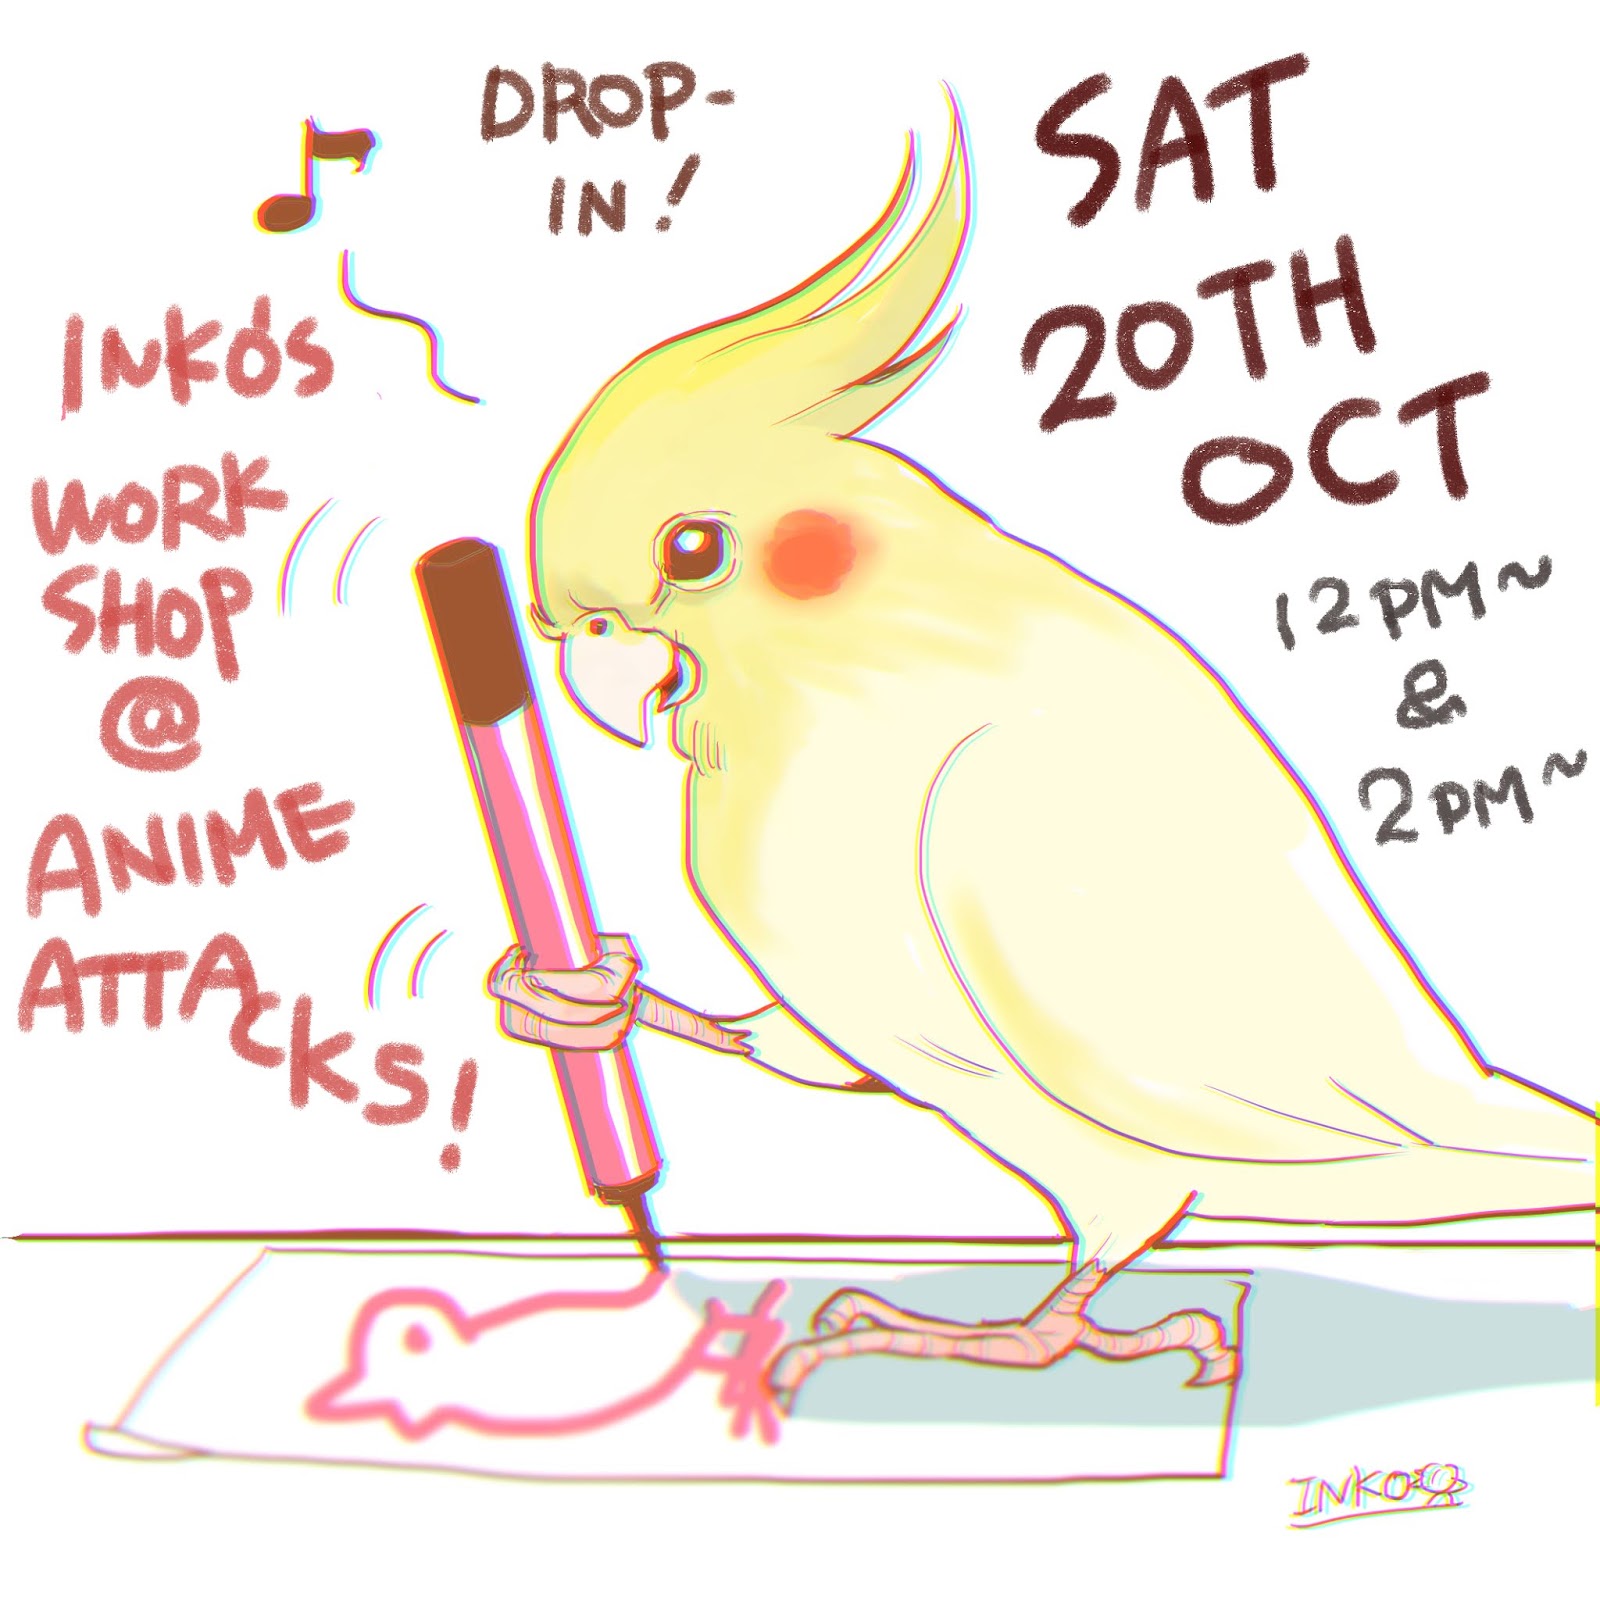 Inko-redible!: Anime Attacks! 8 Gateshead - a guest appearance